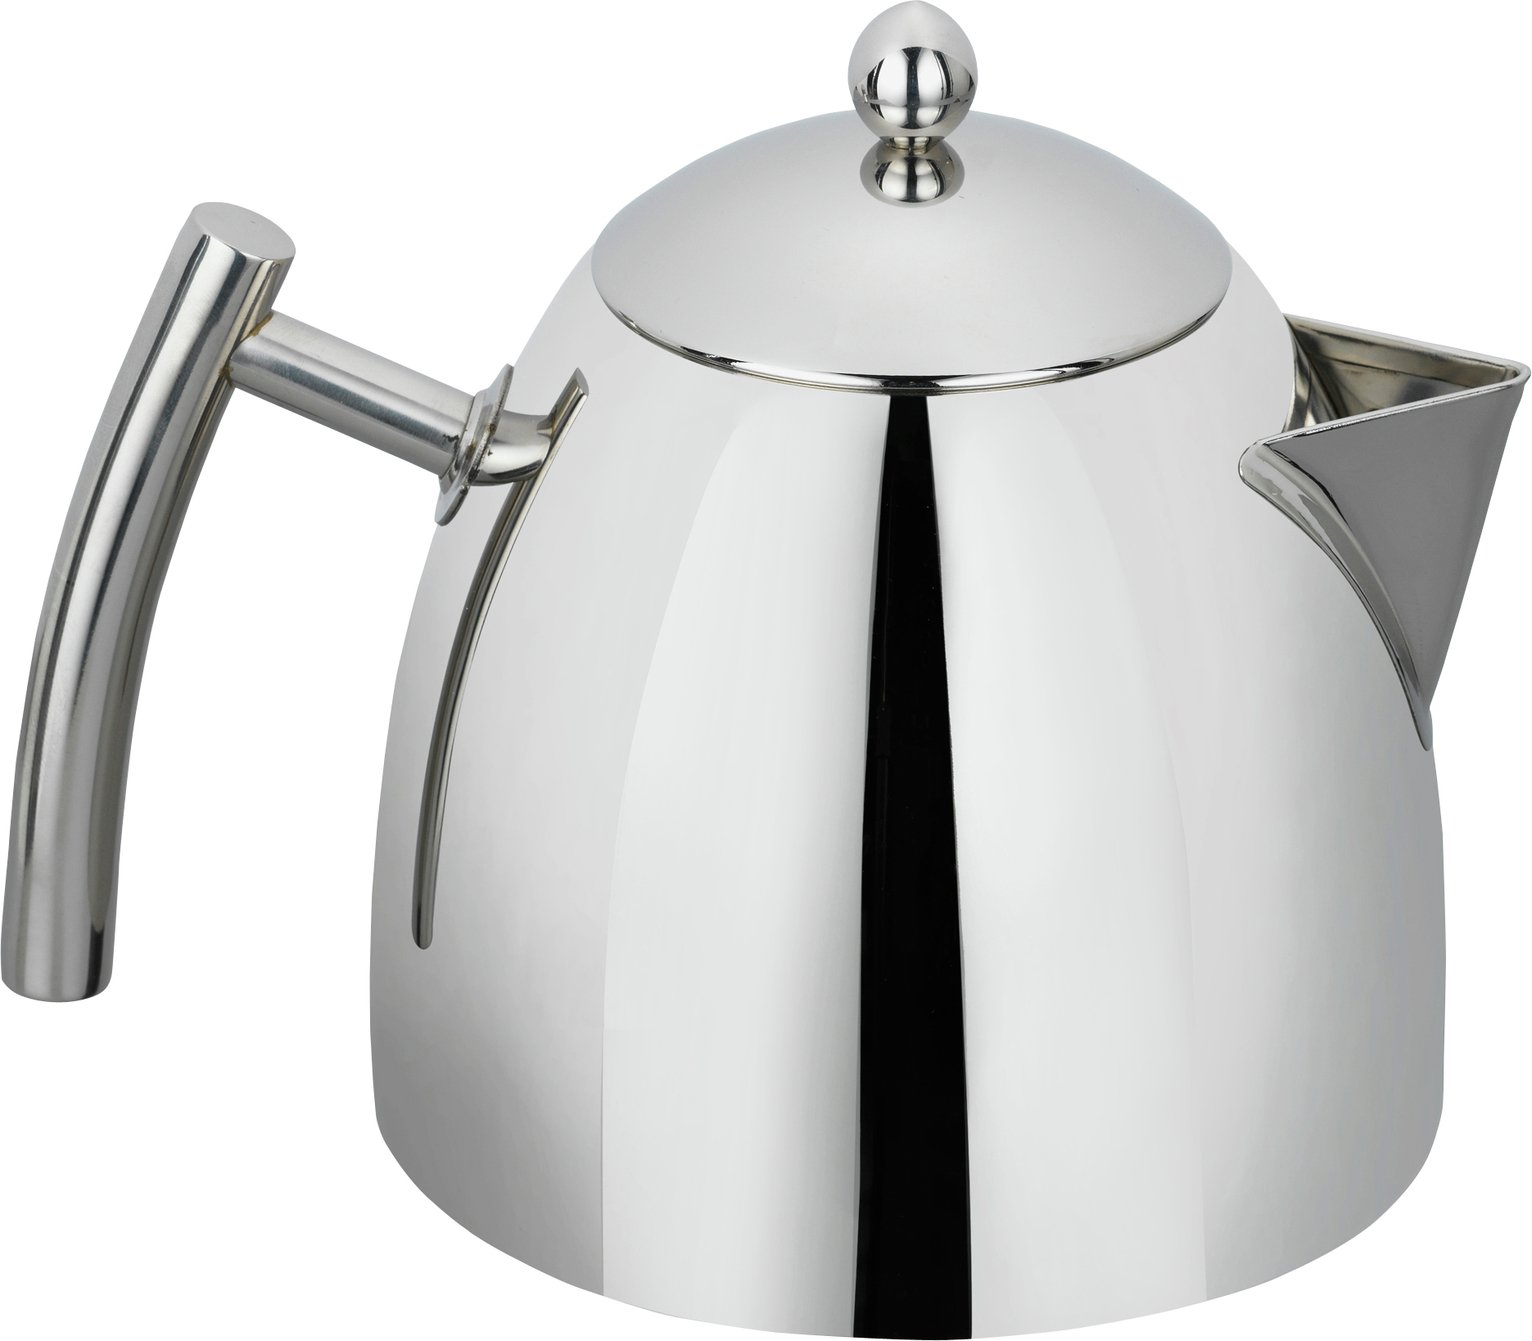 Argos Home Stainless Steel Teapot Review